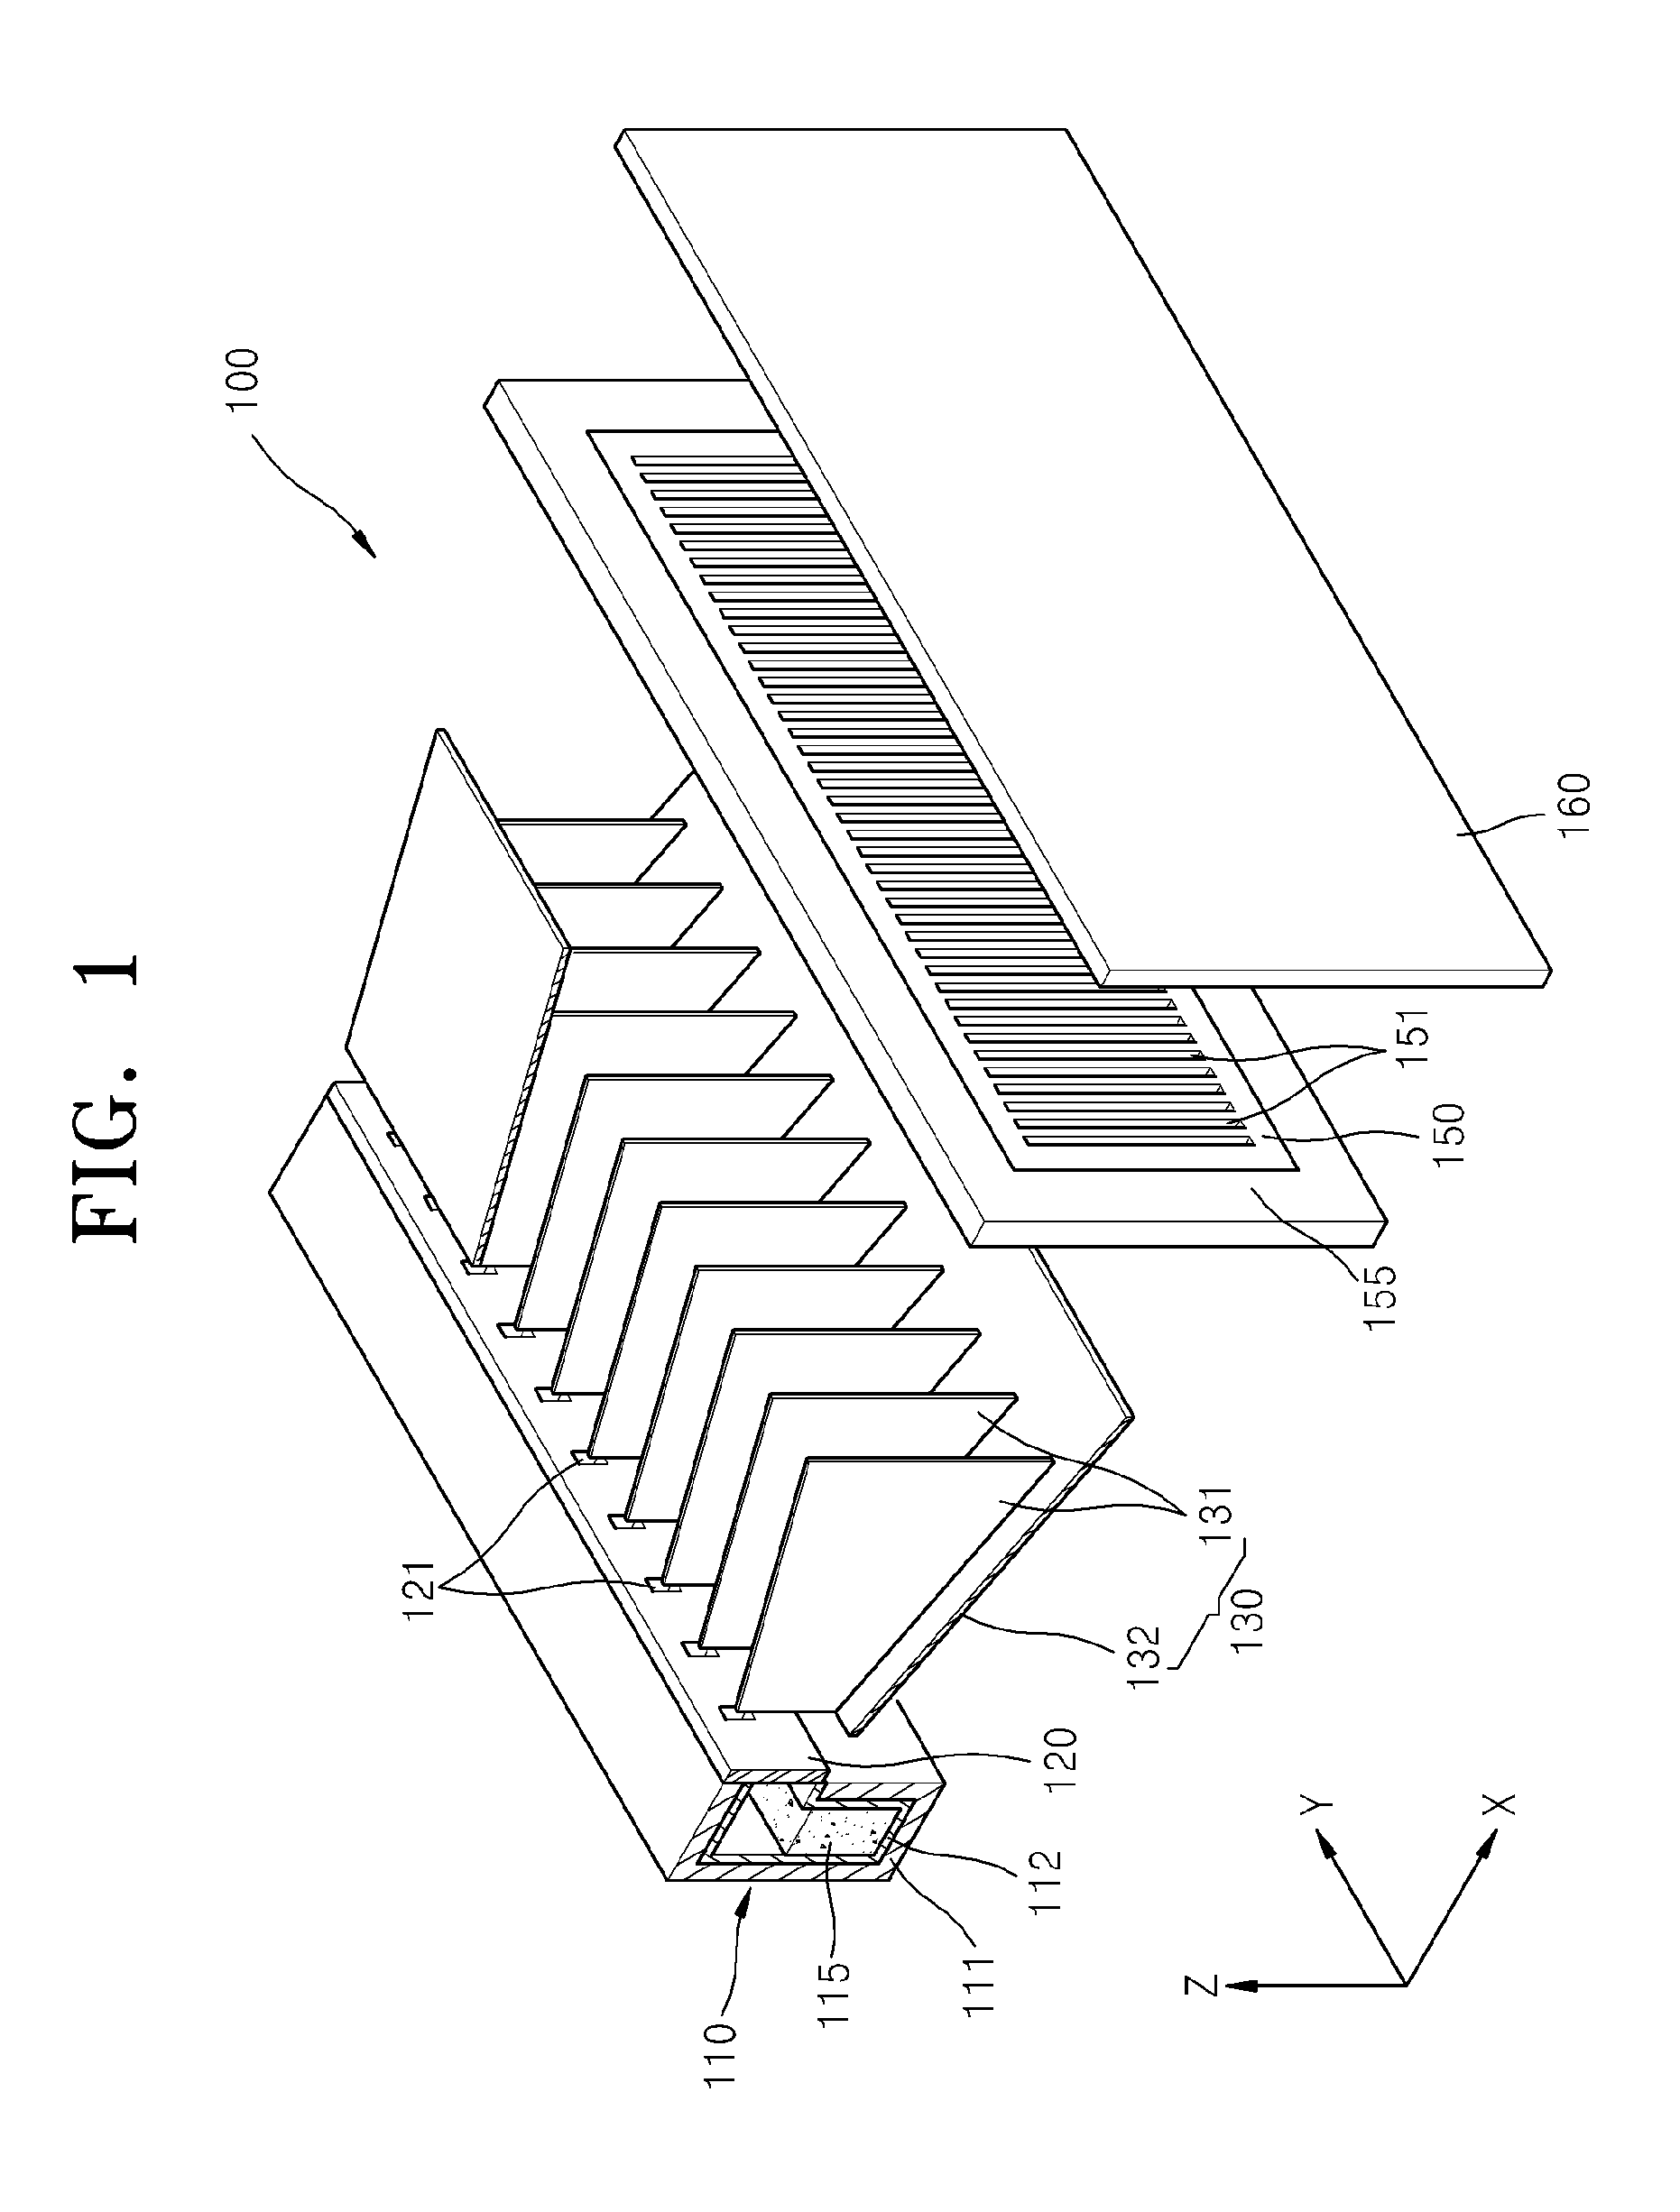 Organic light-emitting display device and thin film deposition apparatus for manufacturing the same